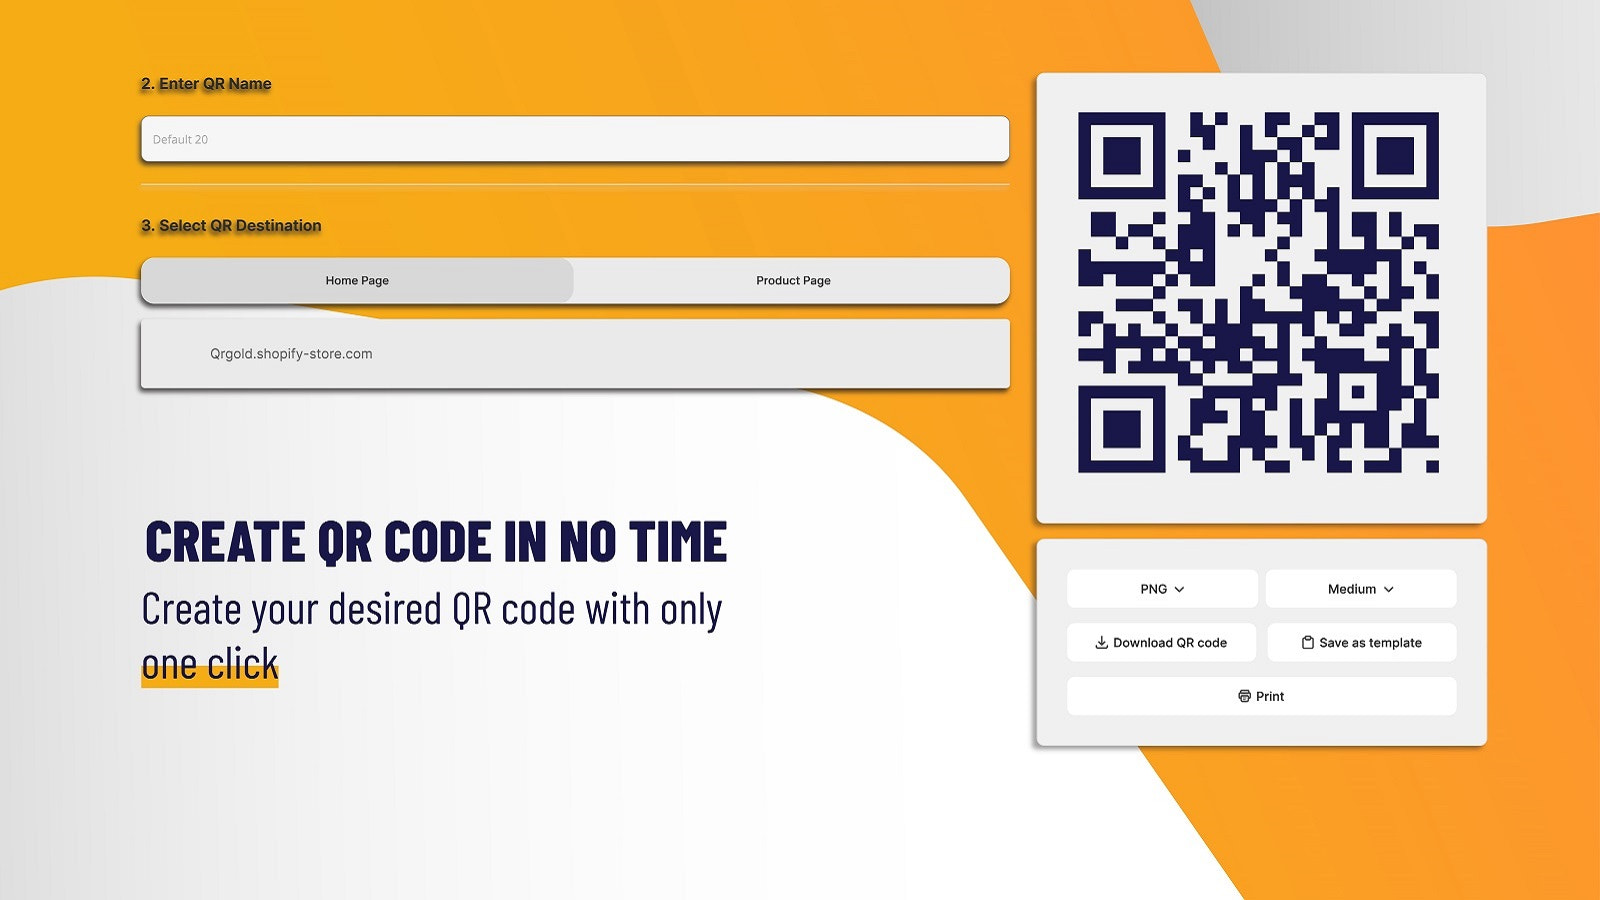 Create your desired QR code with only one click